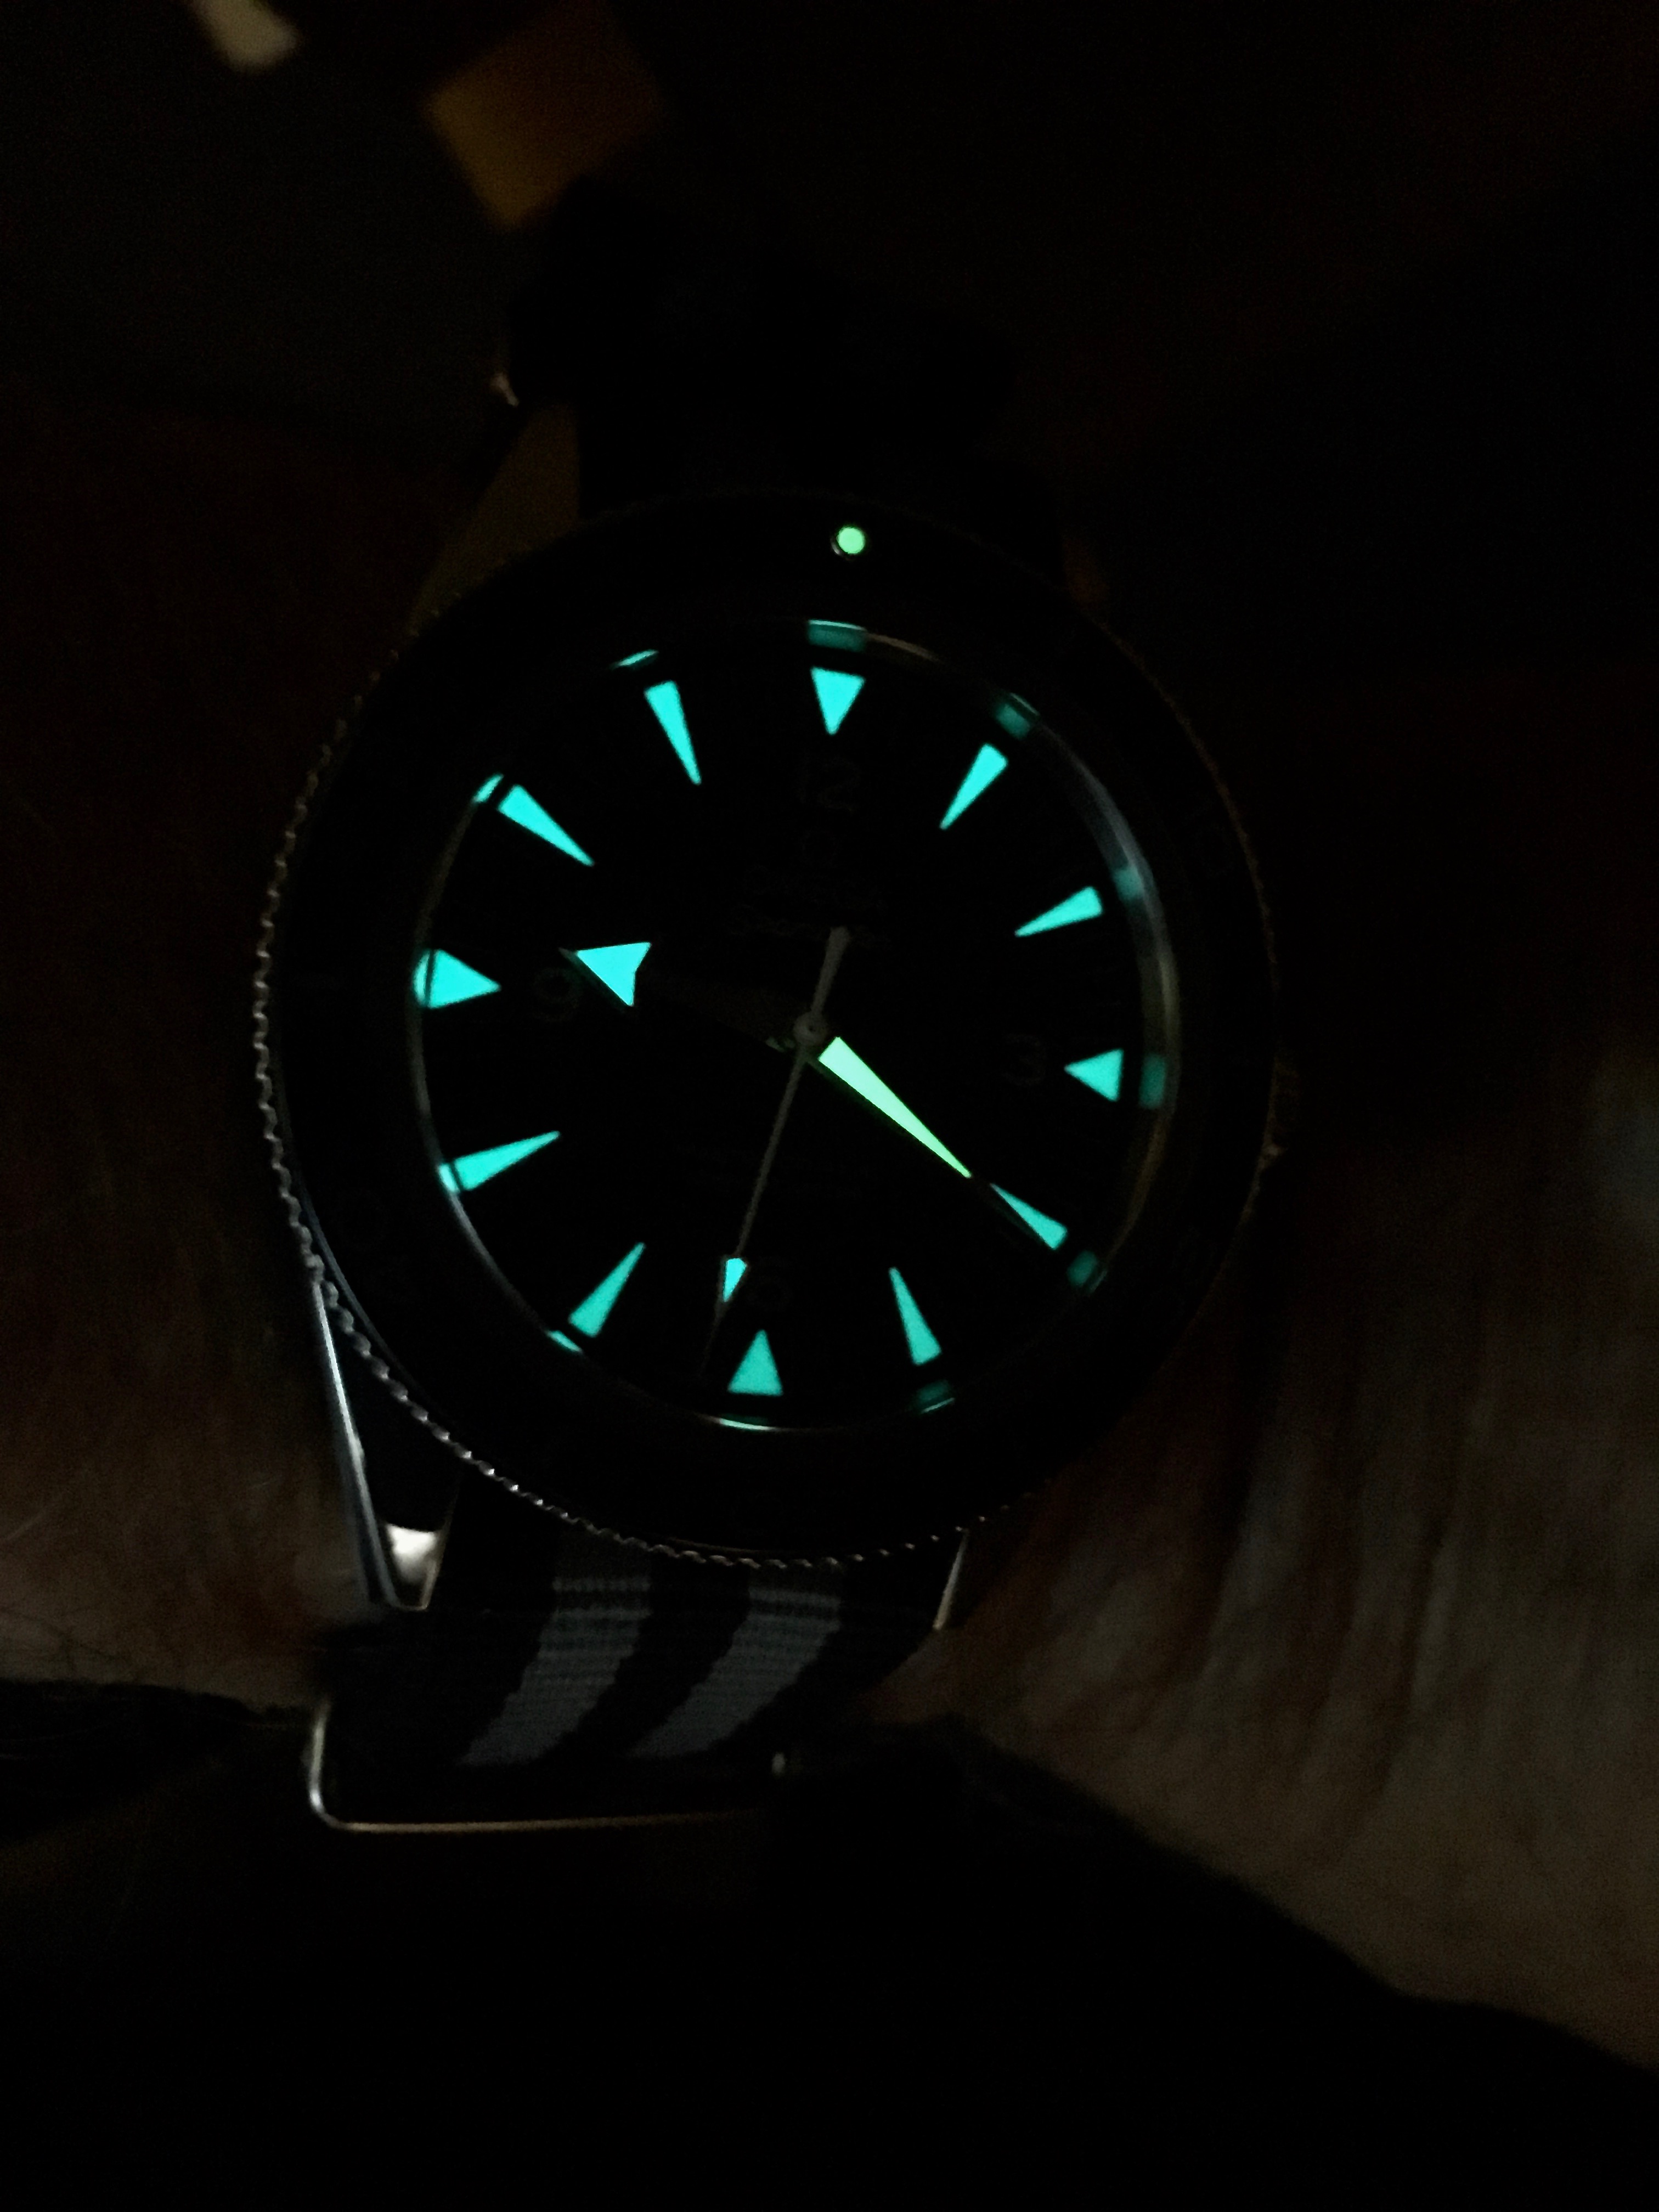 Which has better Lume? AT or Seamaster 